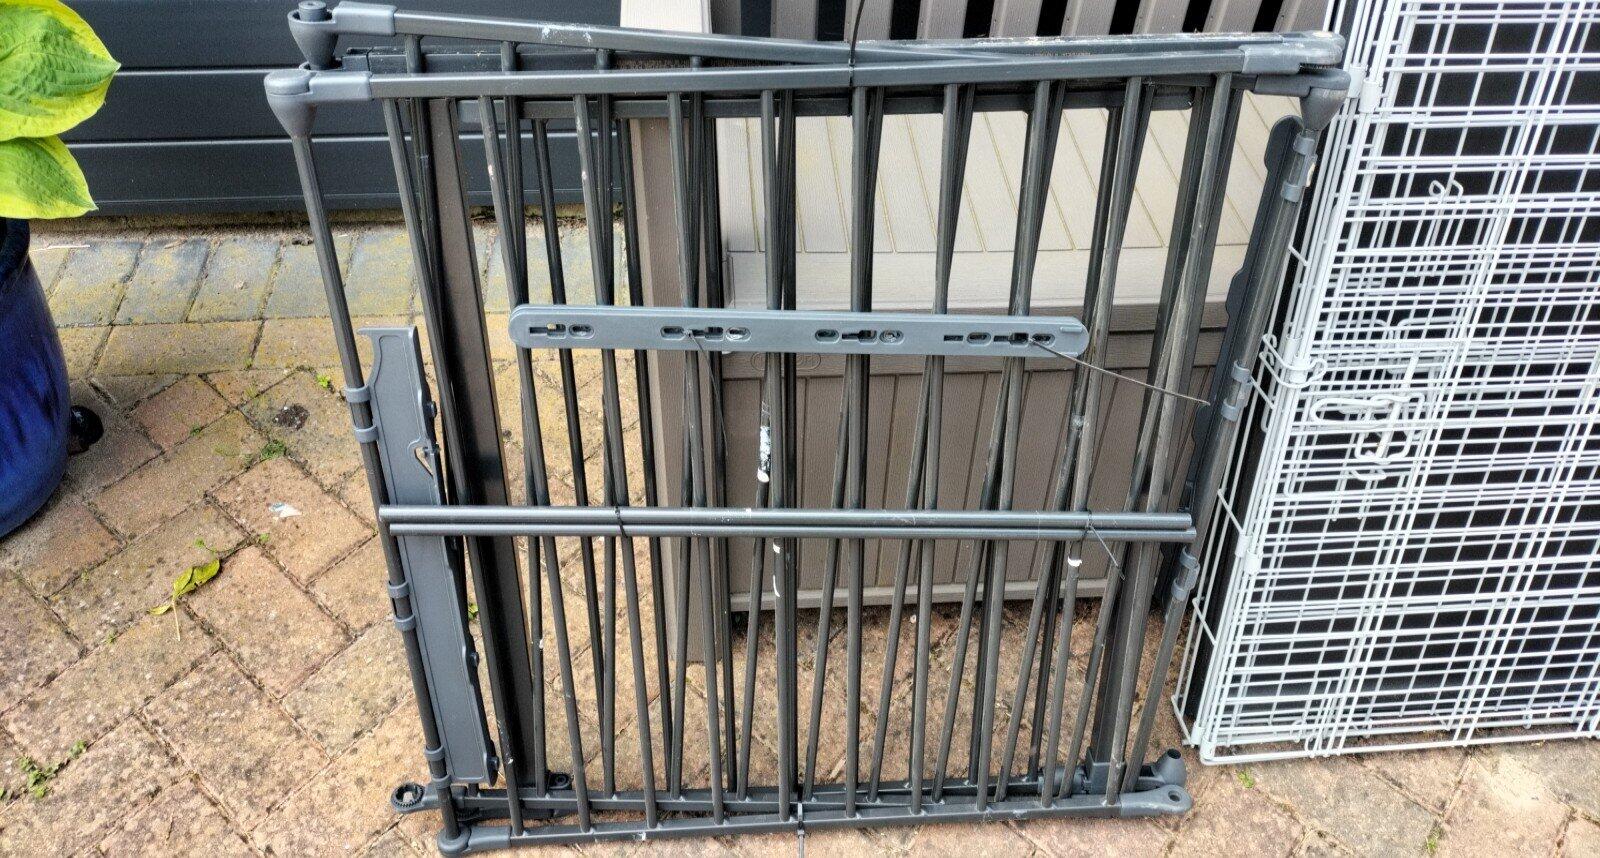 Dog Grate  Railings For £65 In Mordiford, Engl For Sale  Free —  Nextdoor